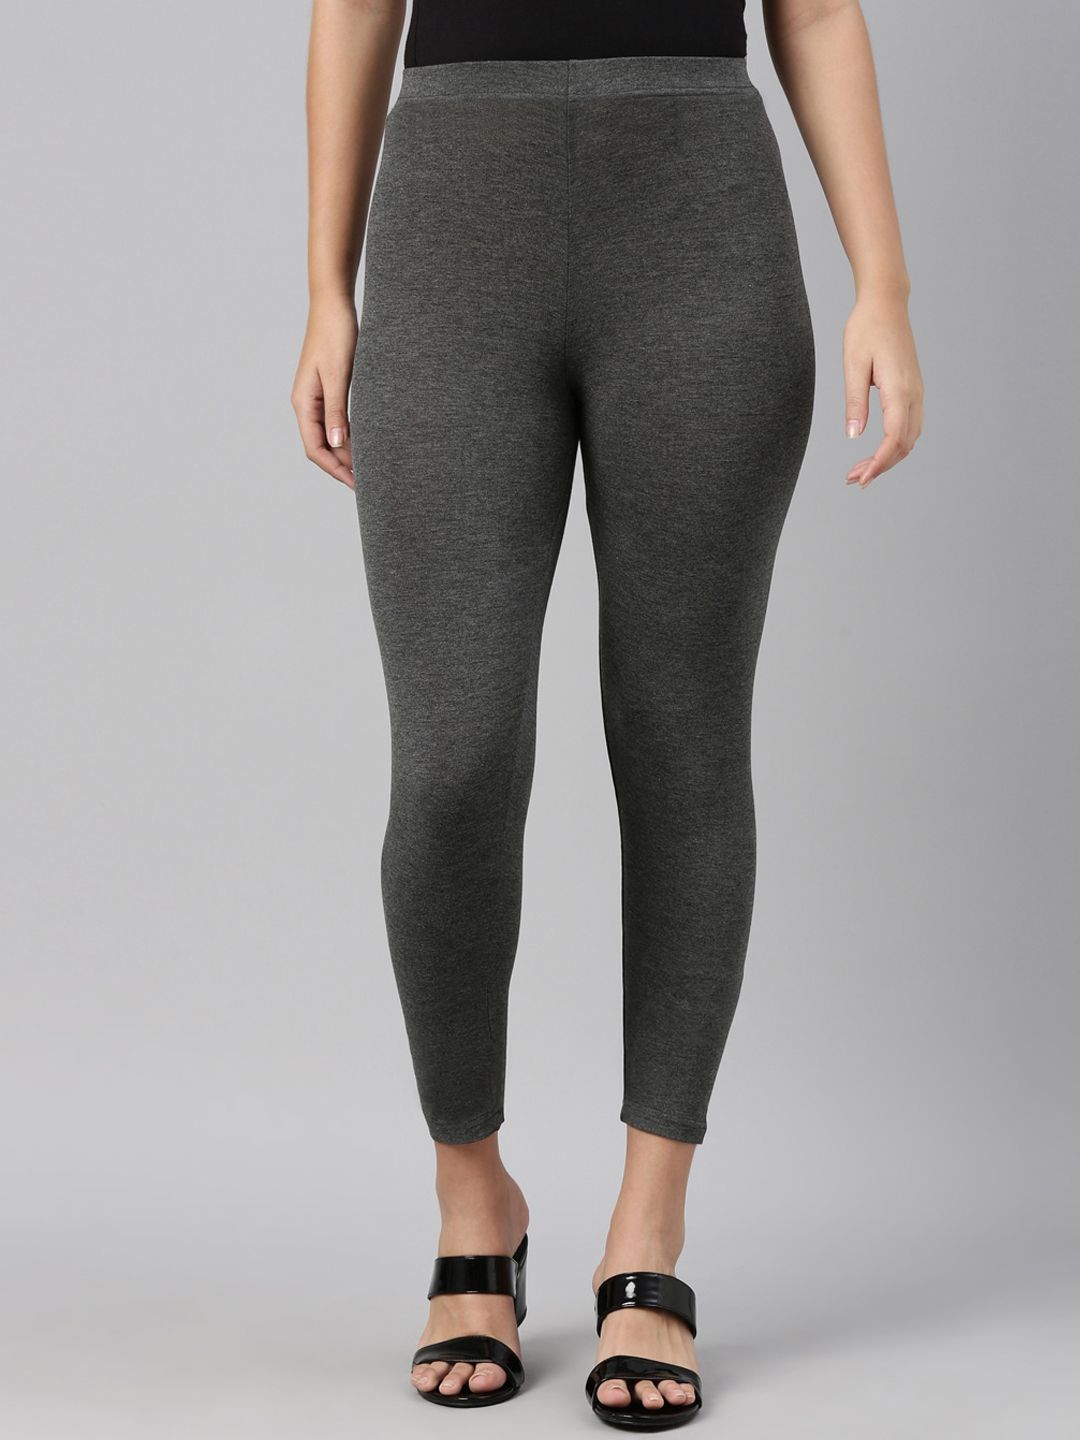 Go Colors Women Grey Solid Cotton Three-Fourth Leggings Price in India